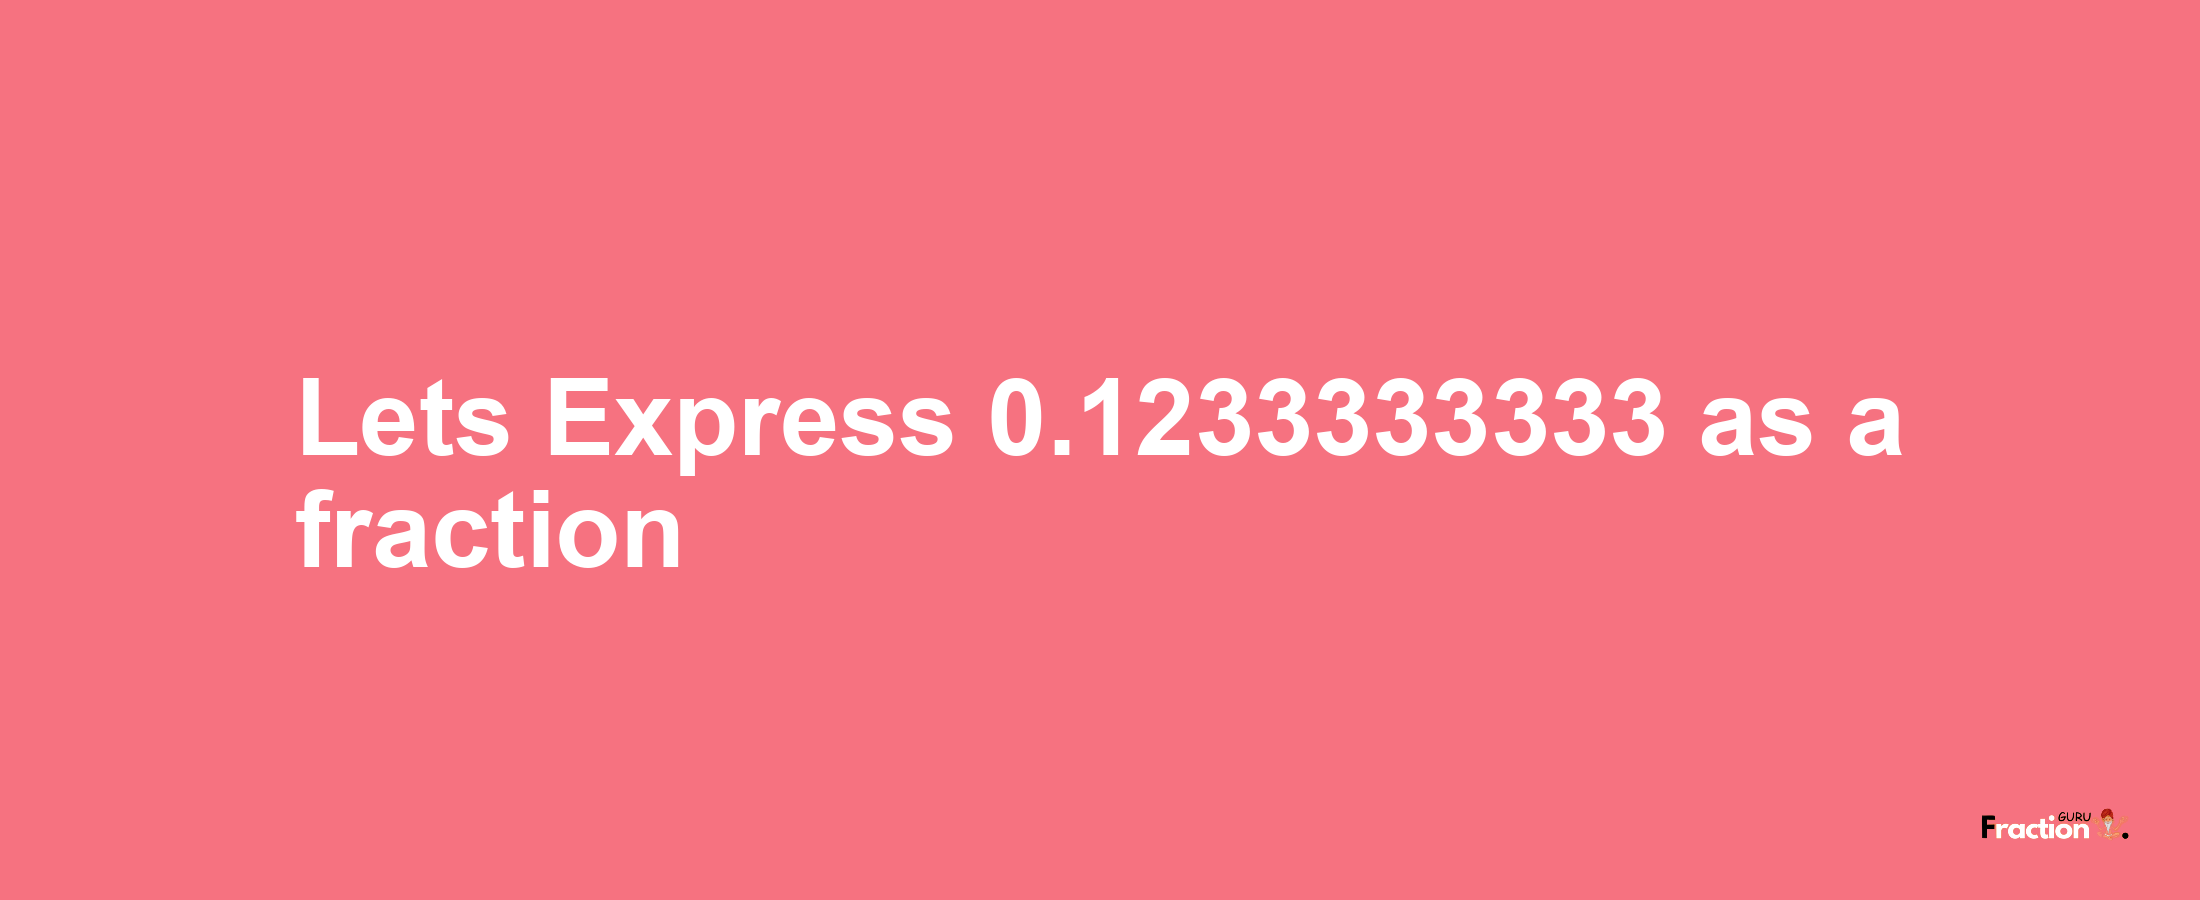 Lets Express 0.1233333333 as afraction